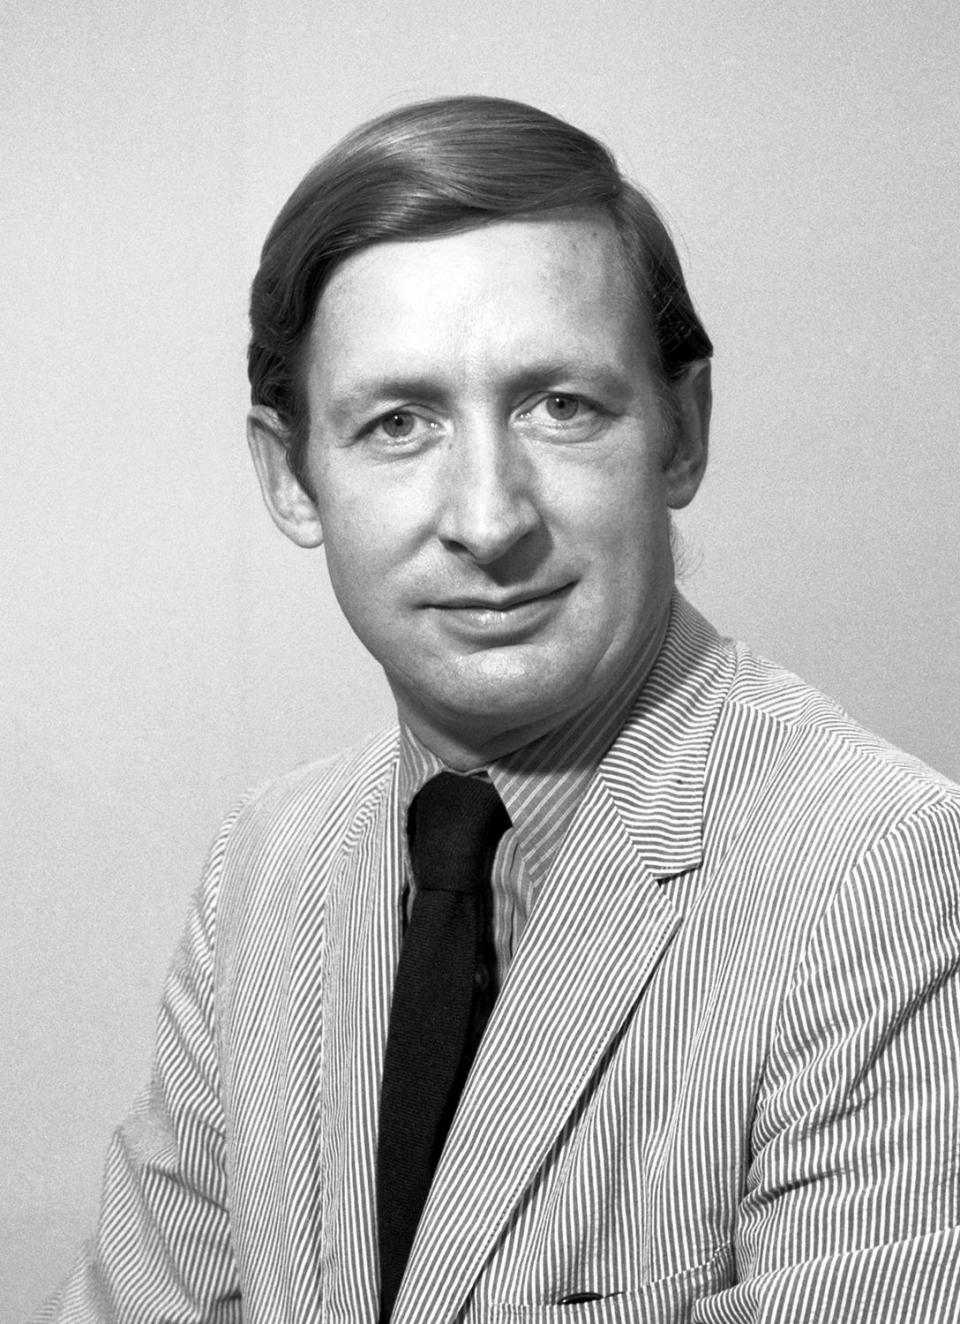 Portrait of CBS News journalist David Culhane from 1971. / Credit: CBS via Getty Images